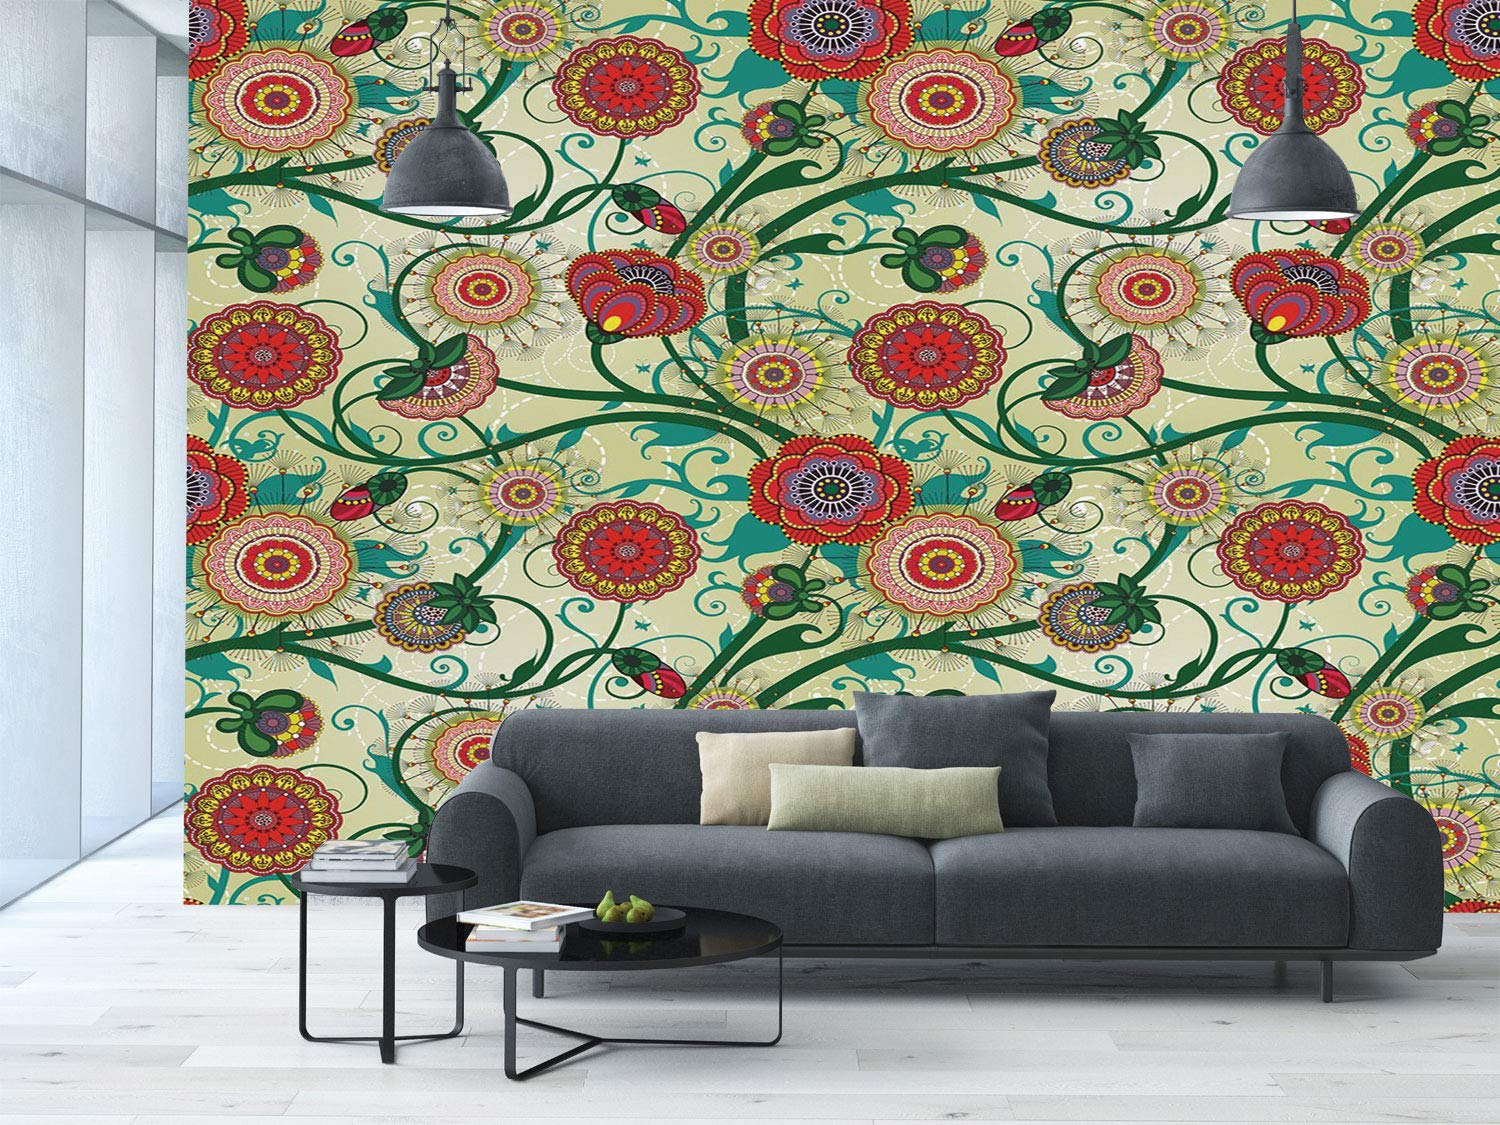 Amazon Large Wall Mural Sticker Floral Vintage Colorful